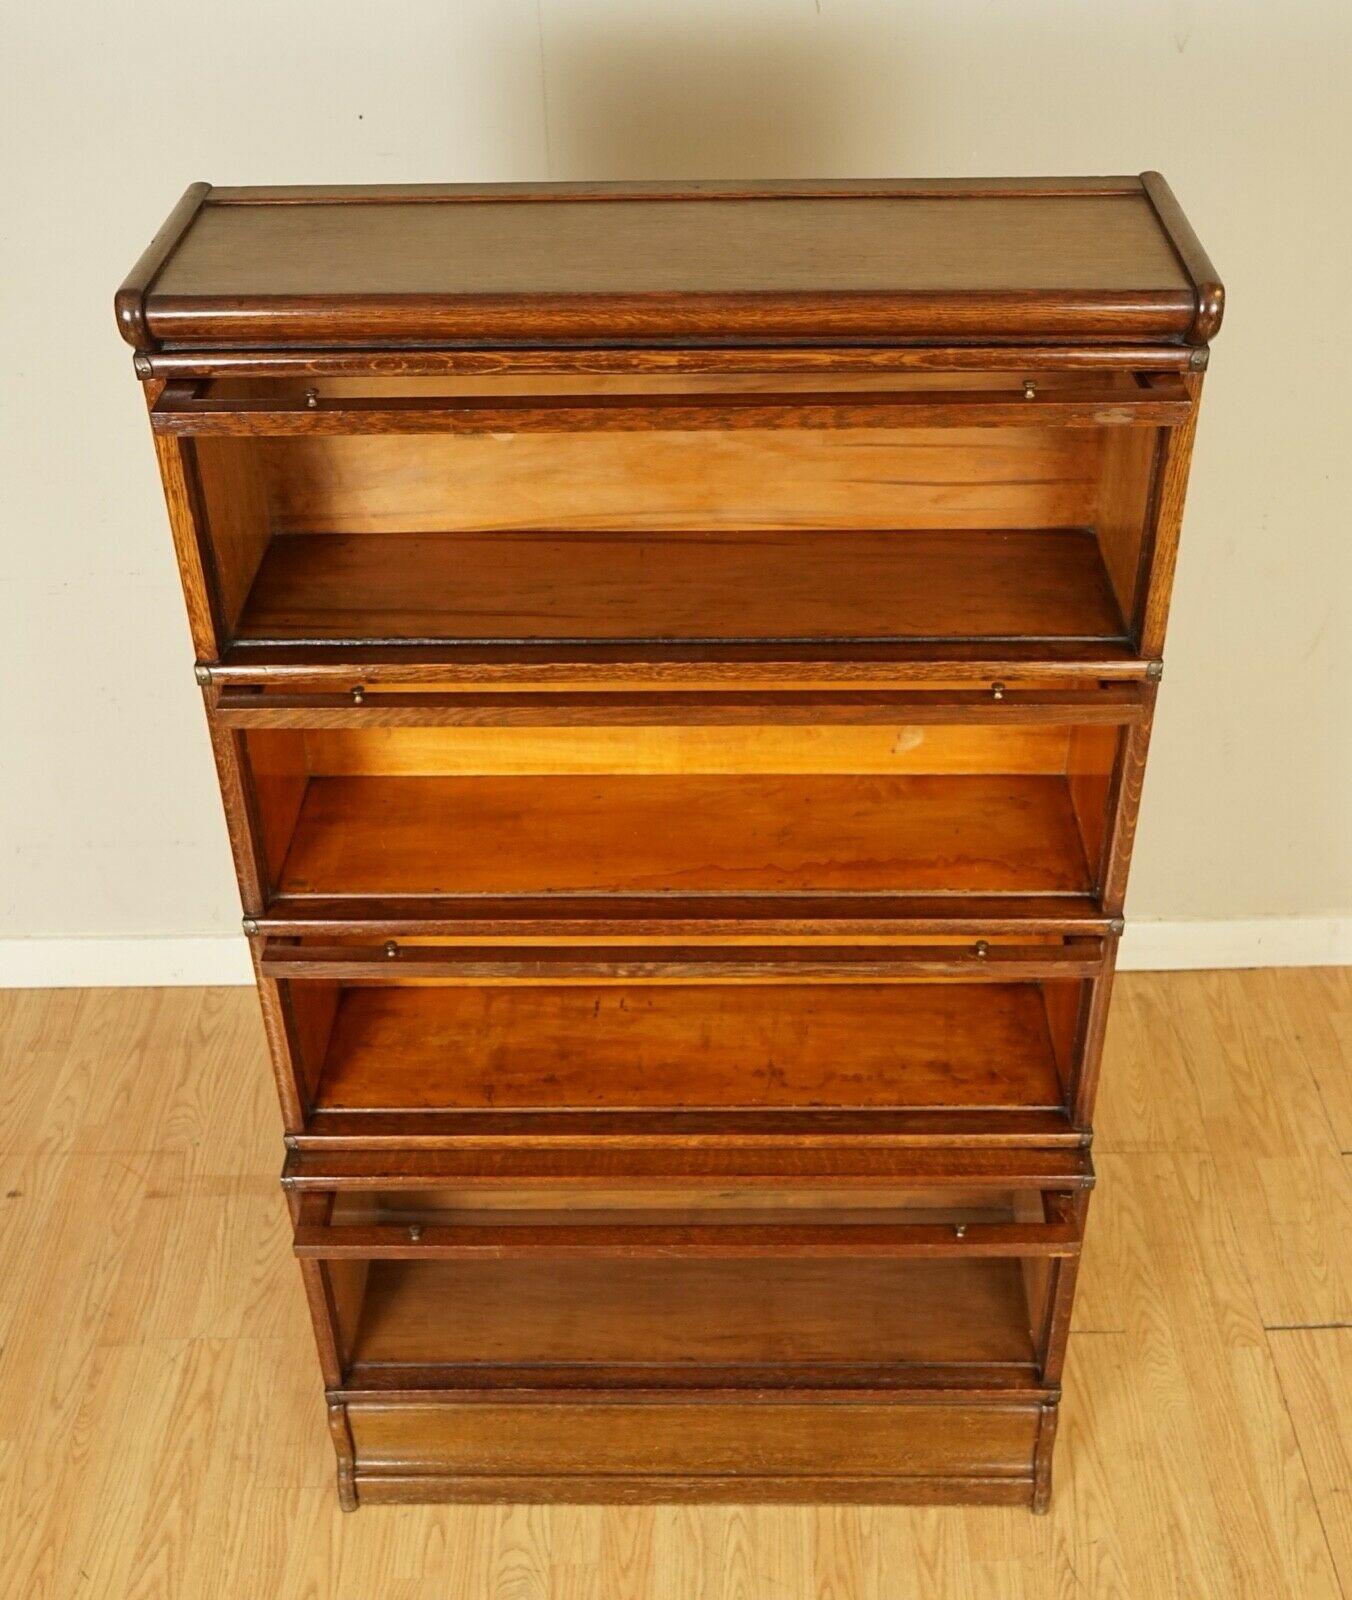 Hand-Crafted Stunning Antique 4 Section Oak Globe Wernicke Barristers Bookcase C.1920 '1/2'